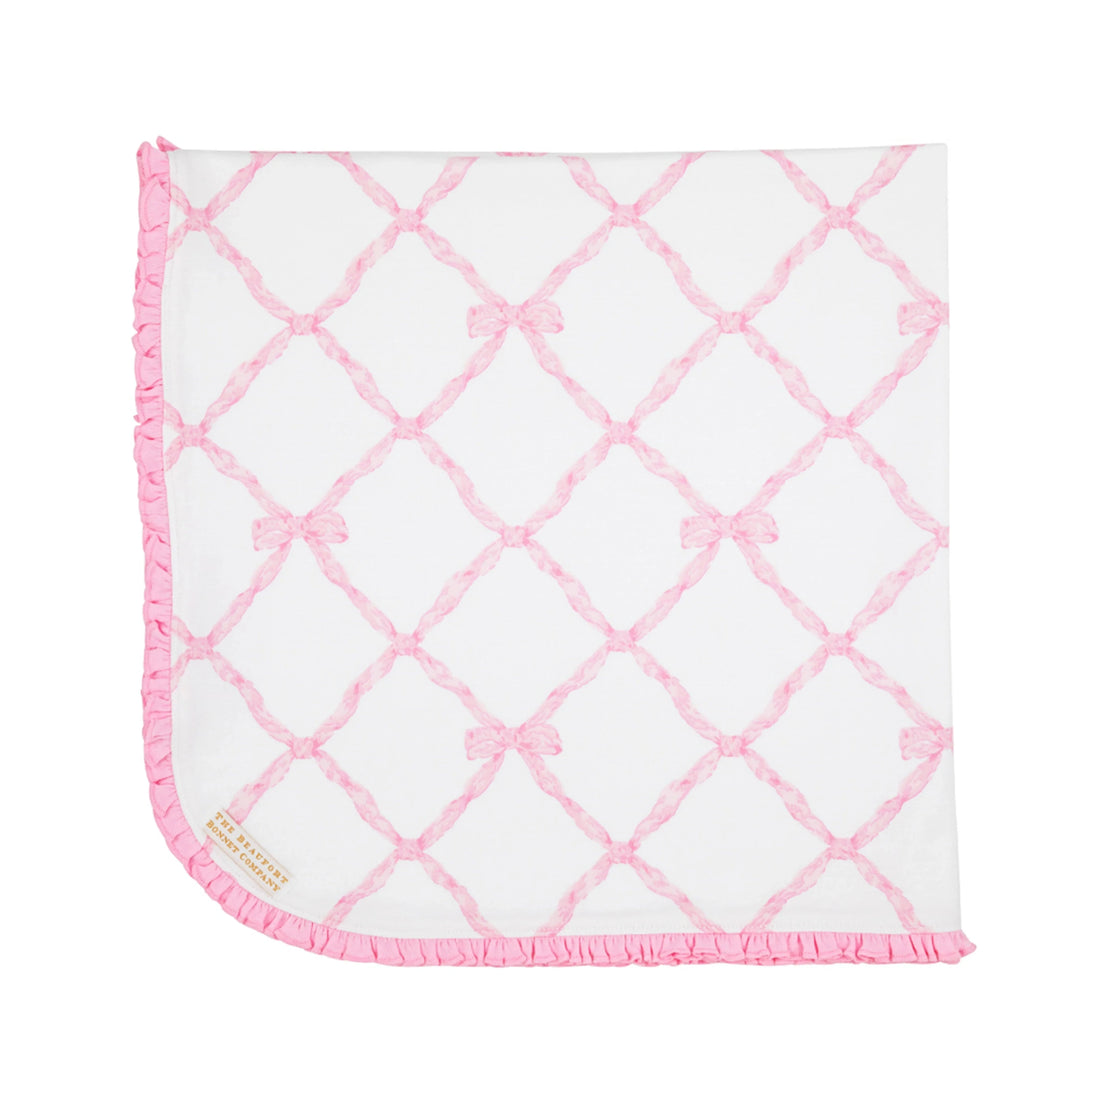 Beaufort Bonnet Baby Buggy Blanket- Belle Meade Bow With Pier Party Pink